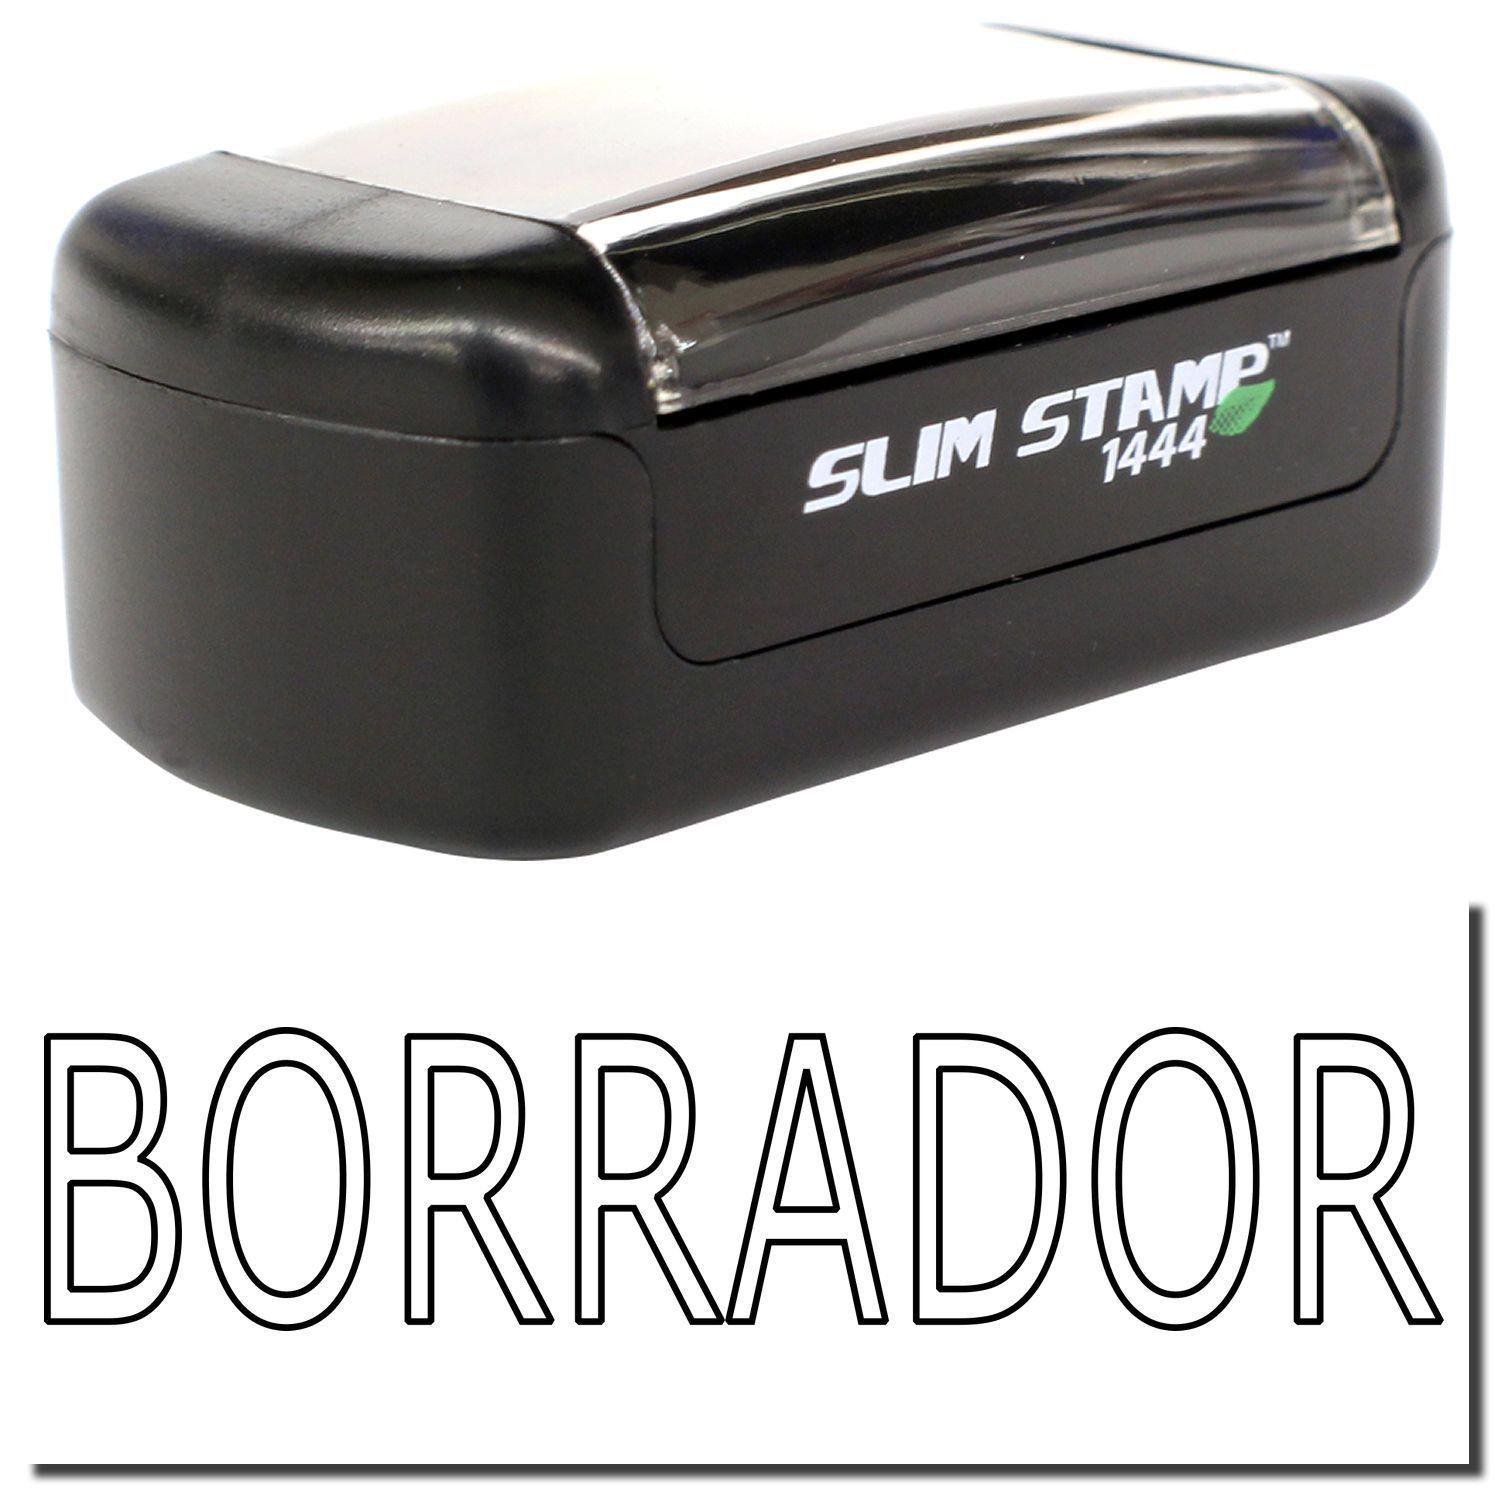 A stock office pre-inked stamp with a stamped image showing how the text "BORRADOR" in an outline font is displayed after stamping.